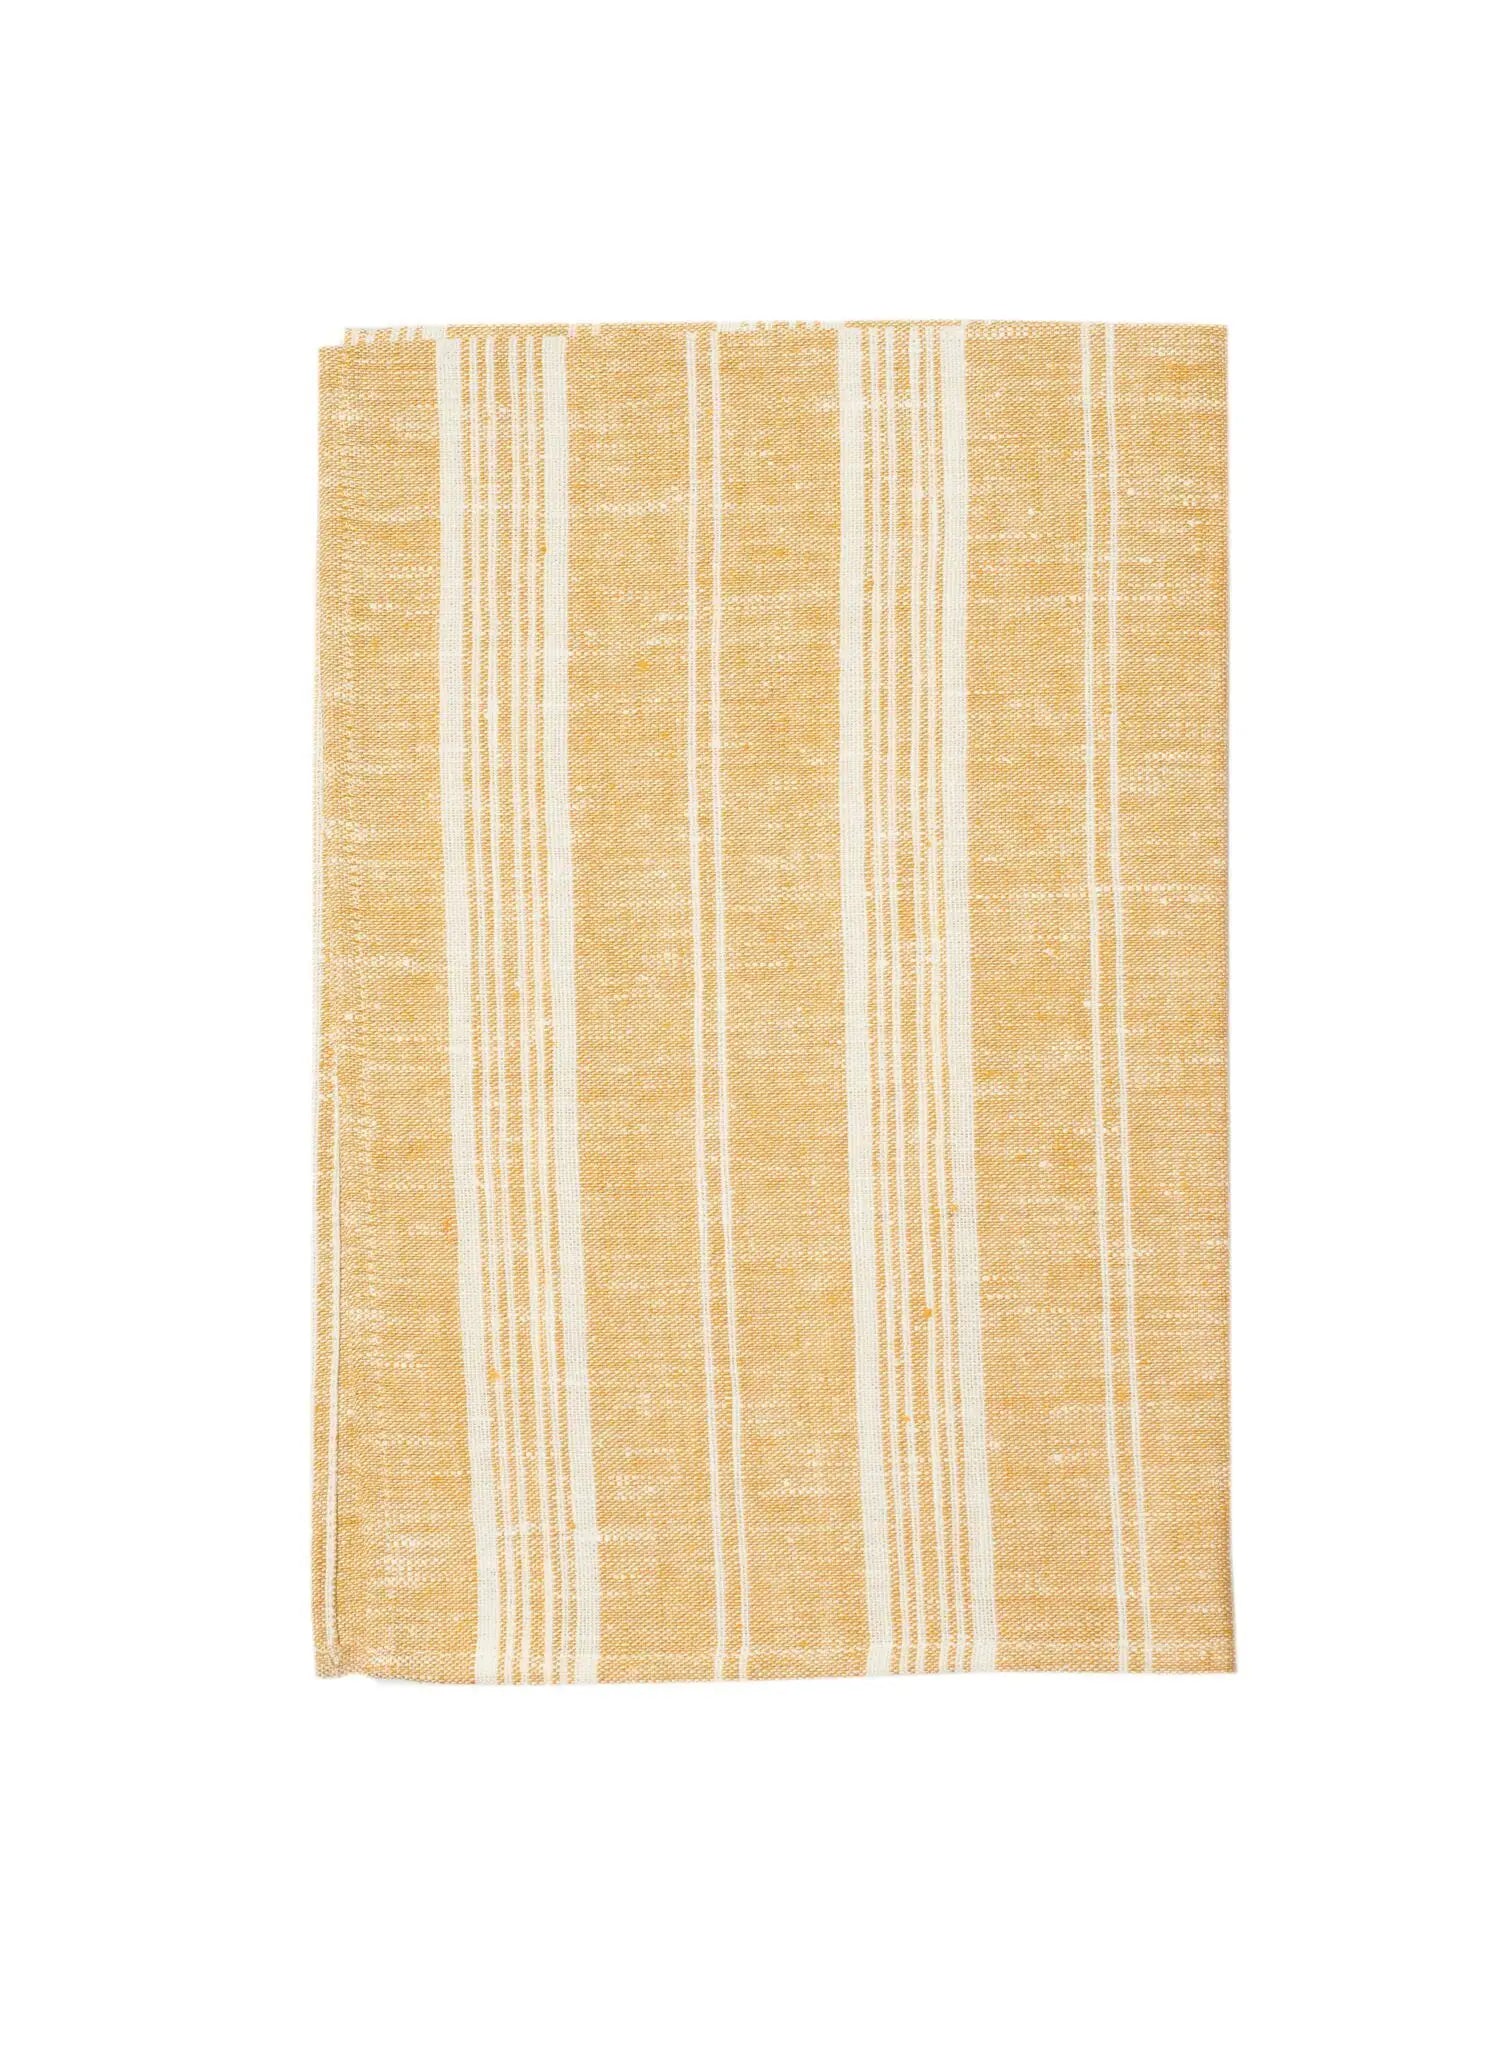 Pierre Tea Towel~ Yellow with Off White